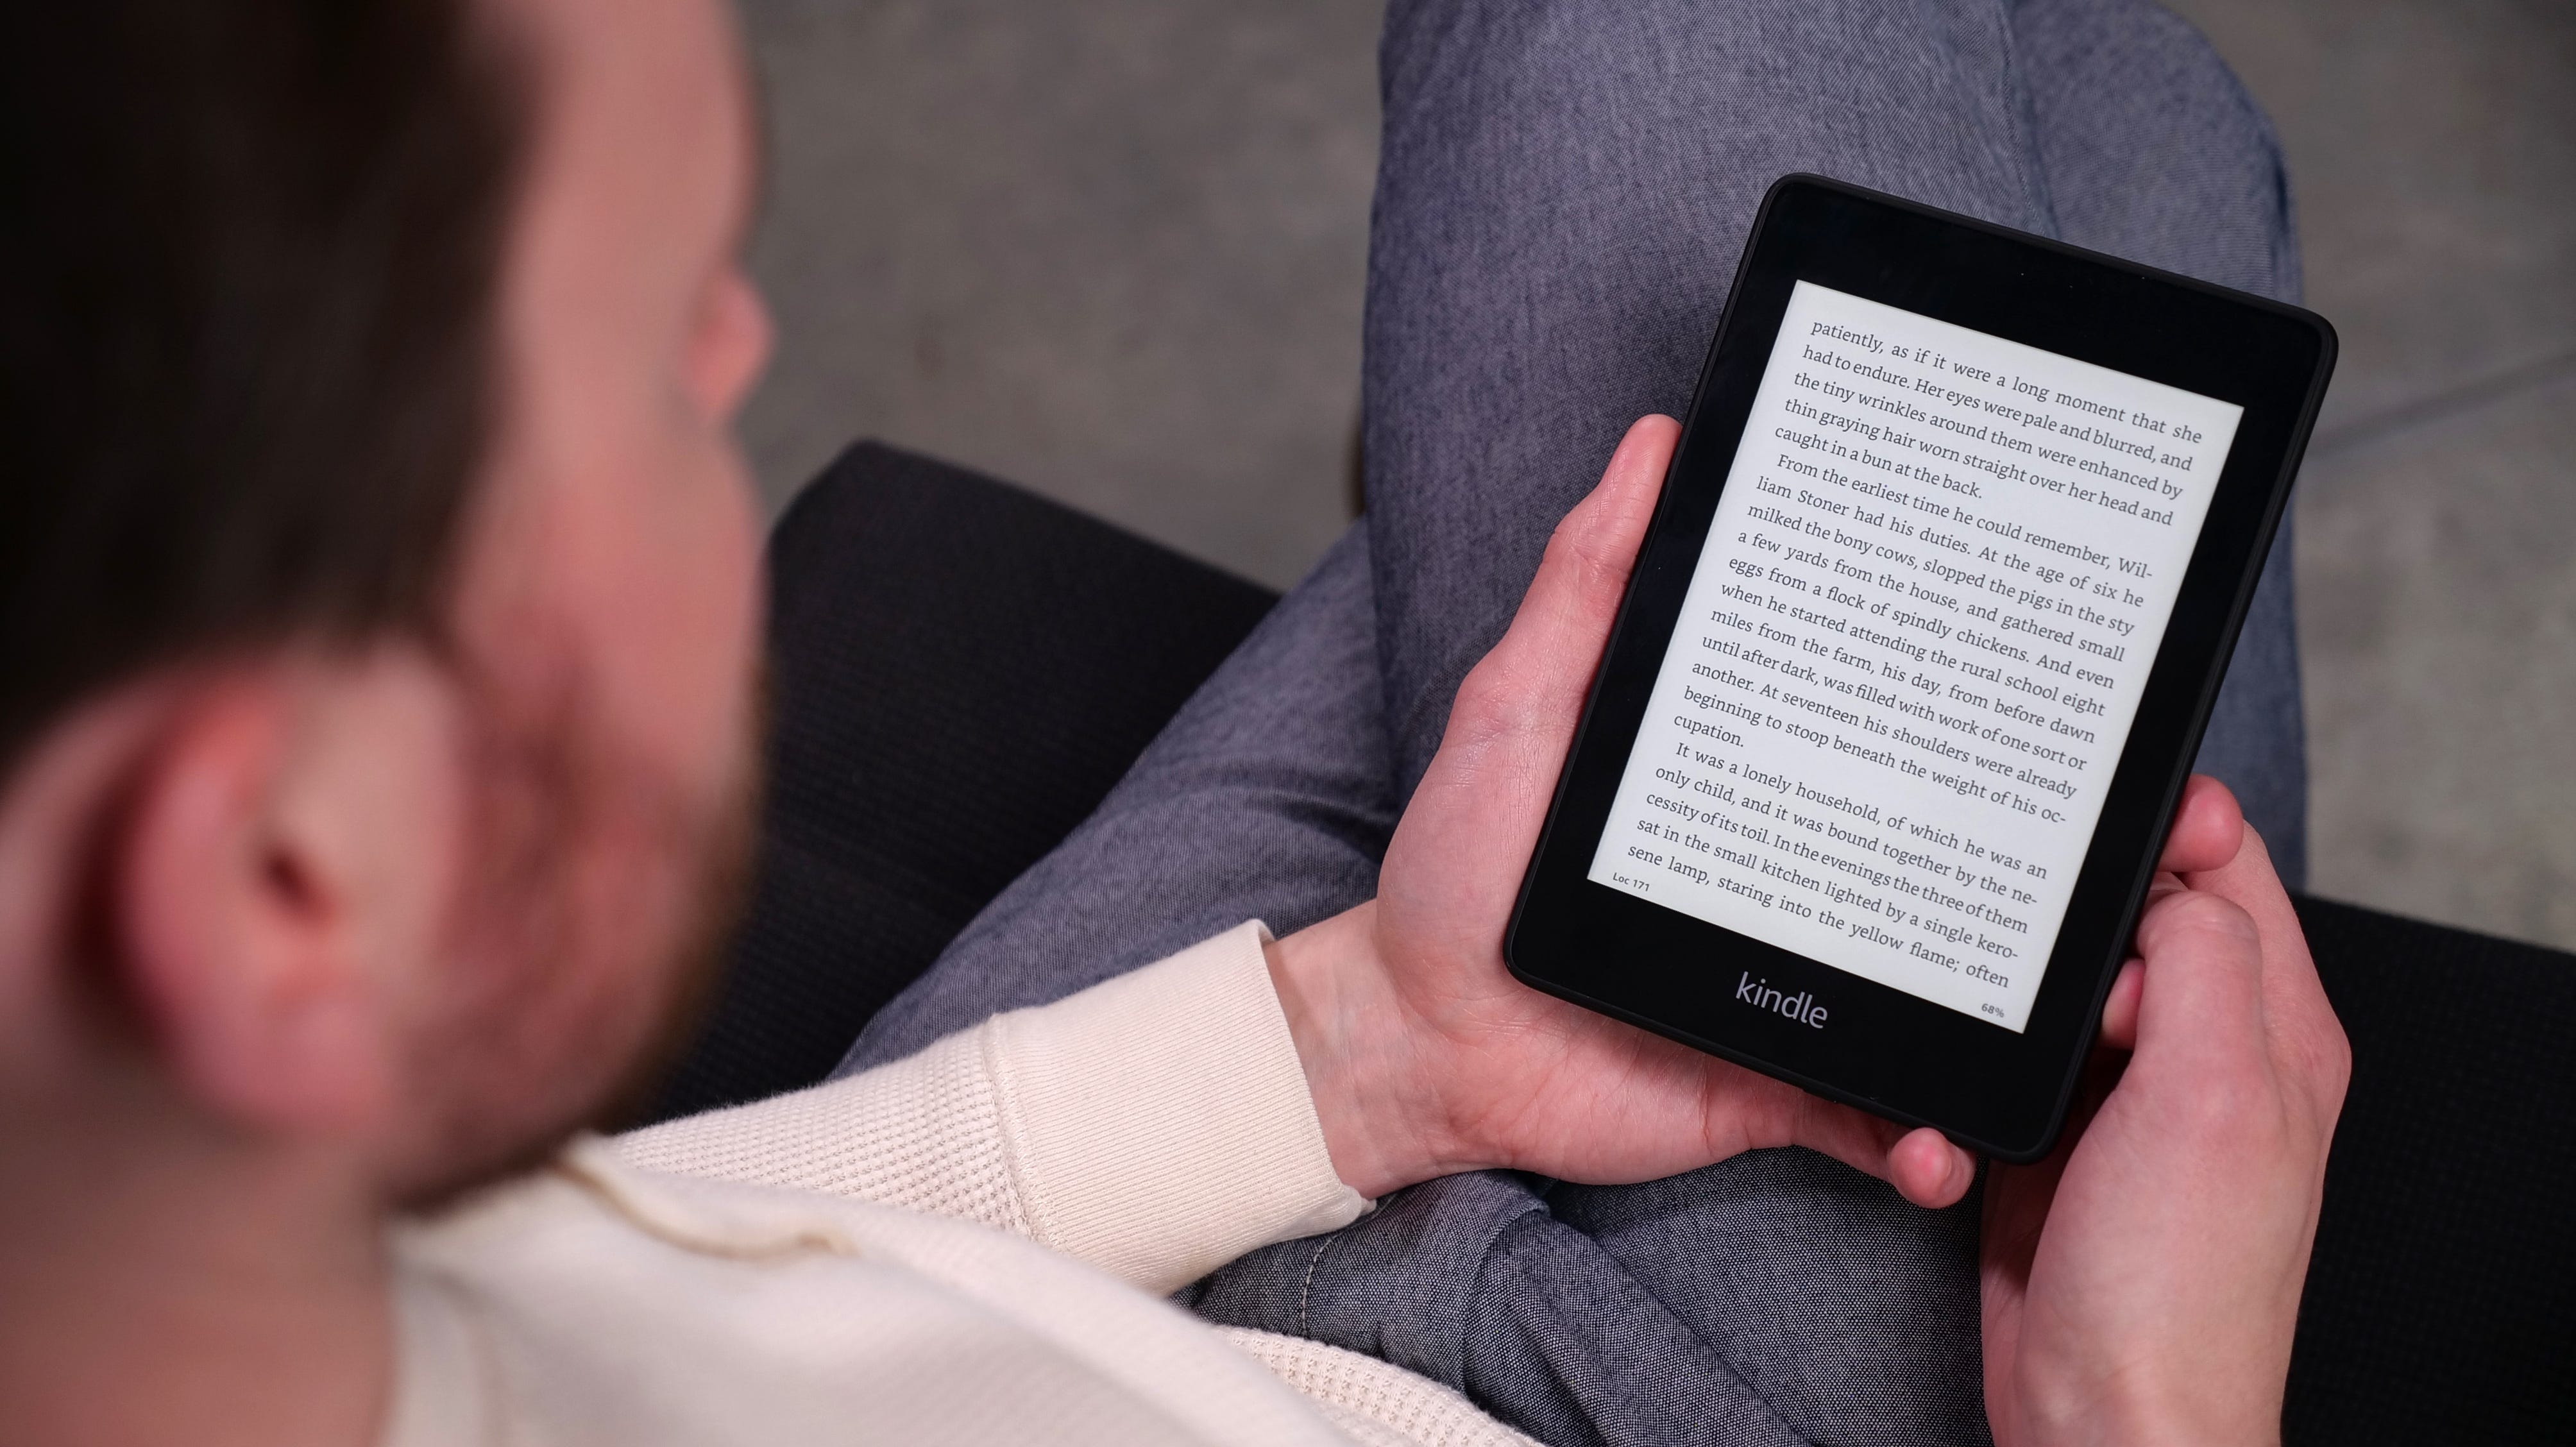 Get an incredible deal on the Kindle Paperwhite, Kindle, and Kindle Unlimited